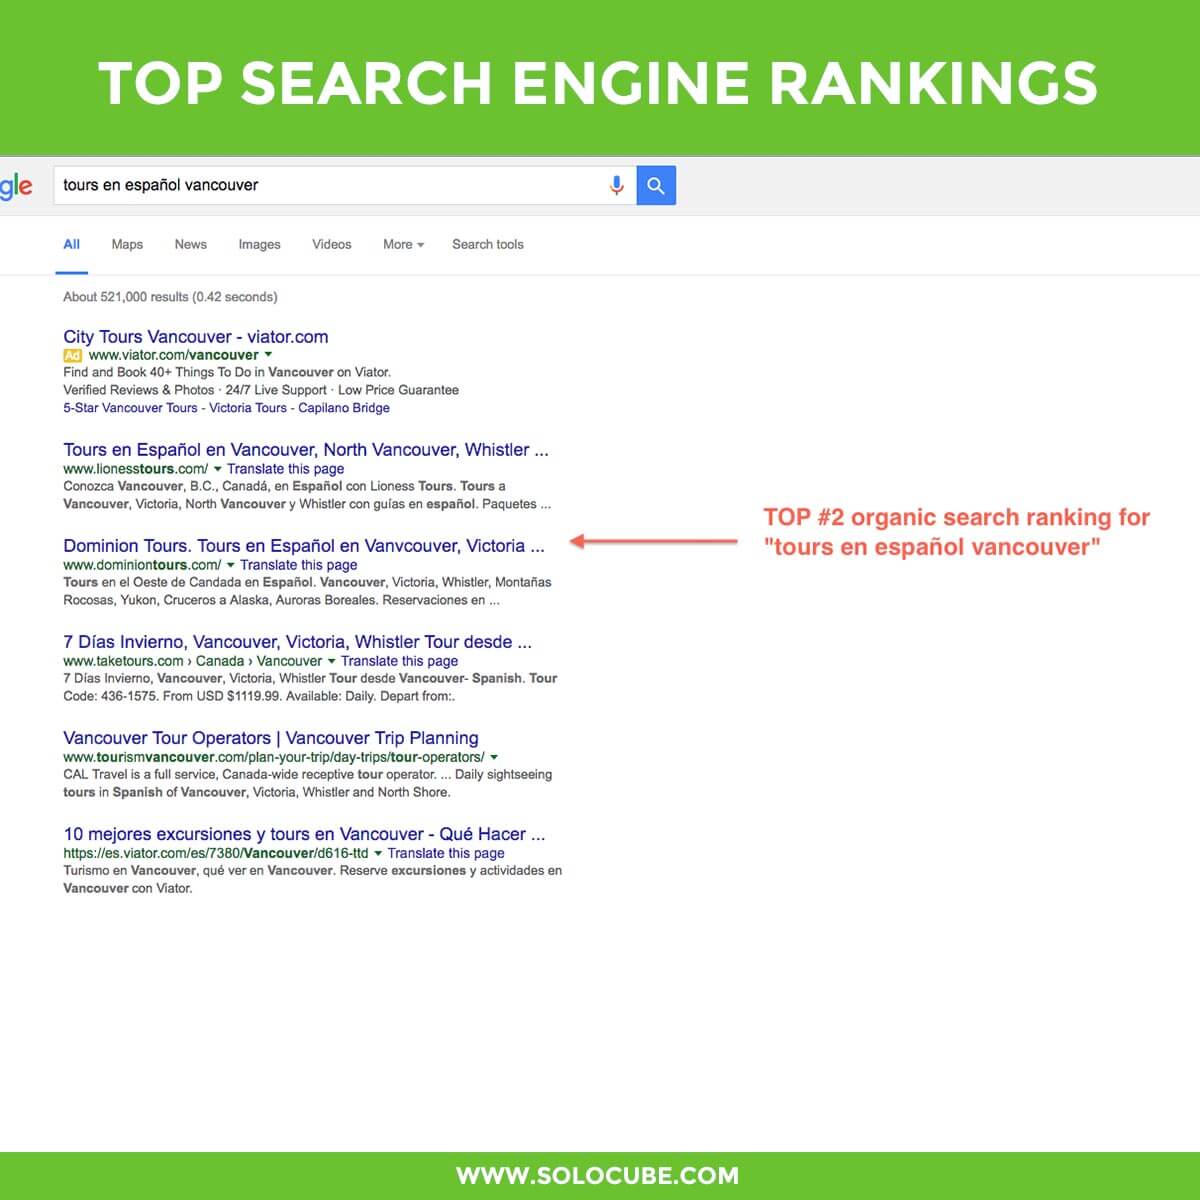 top SEO google ranking by solocube 08 - SEO Vancouver, BC